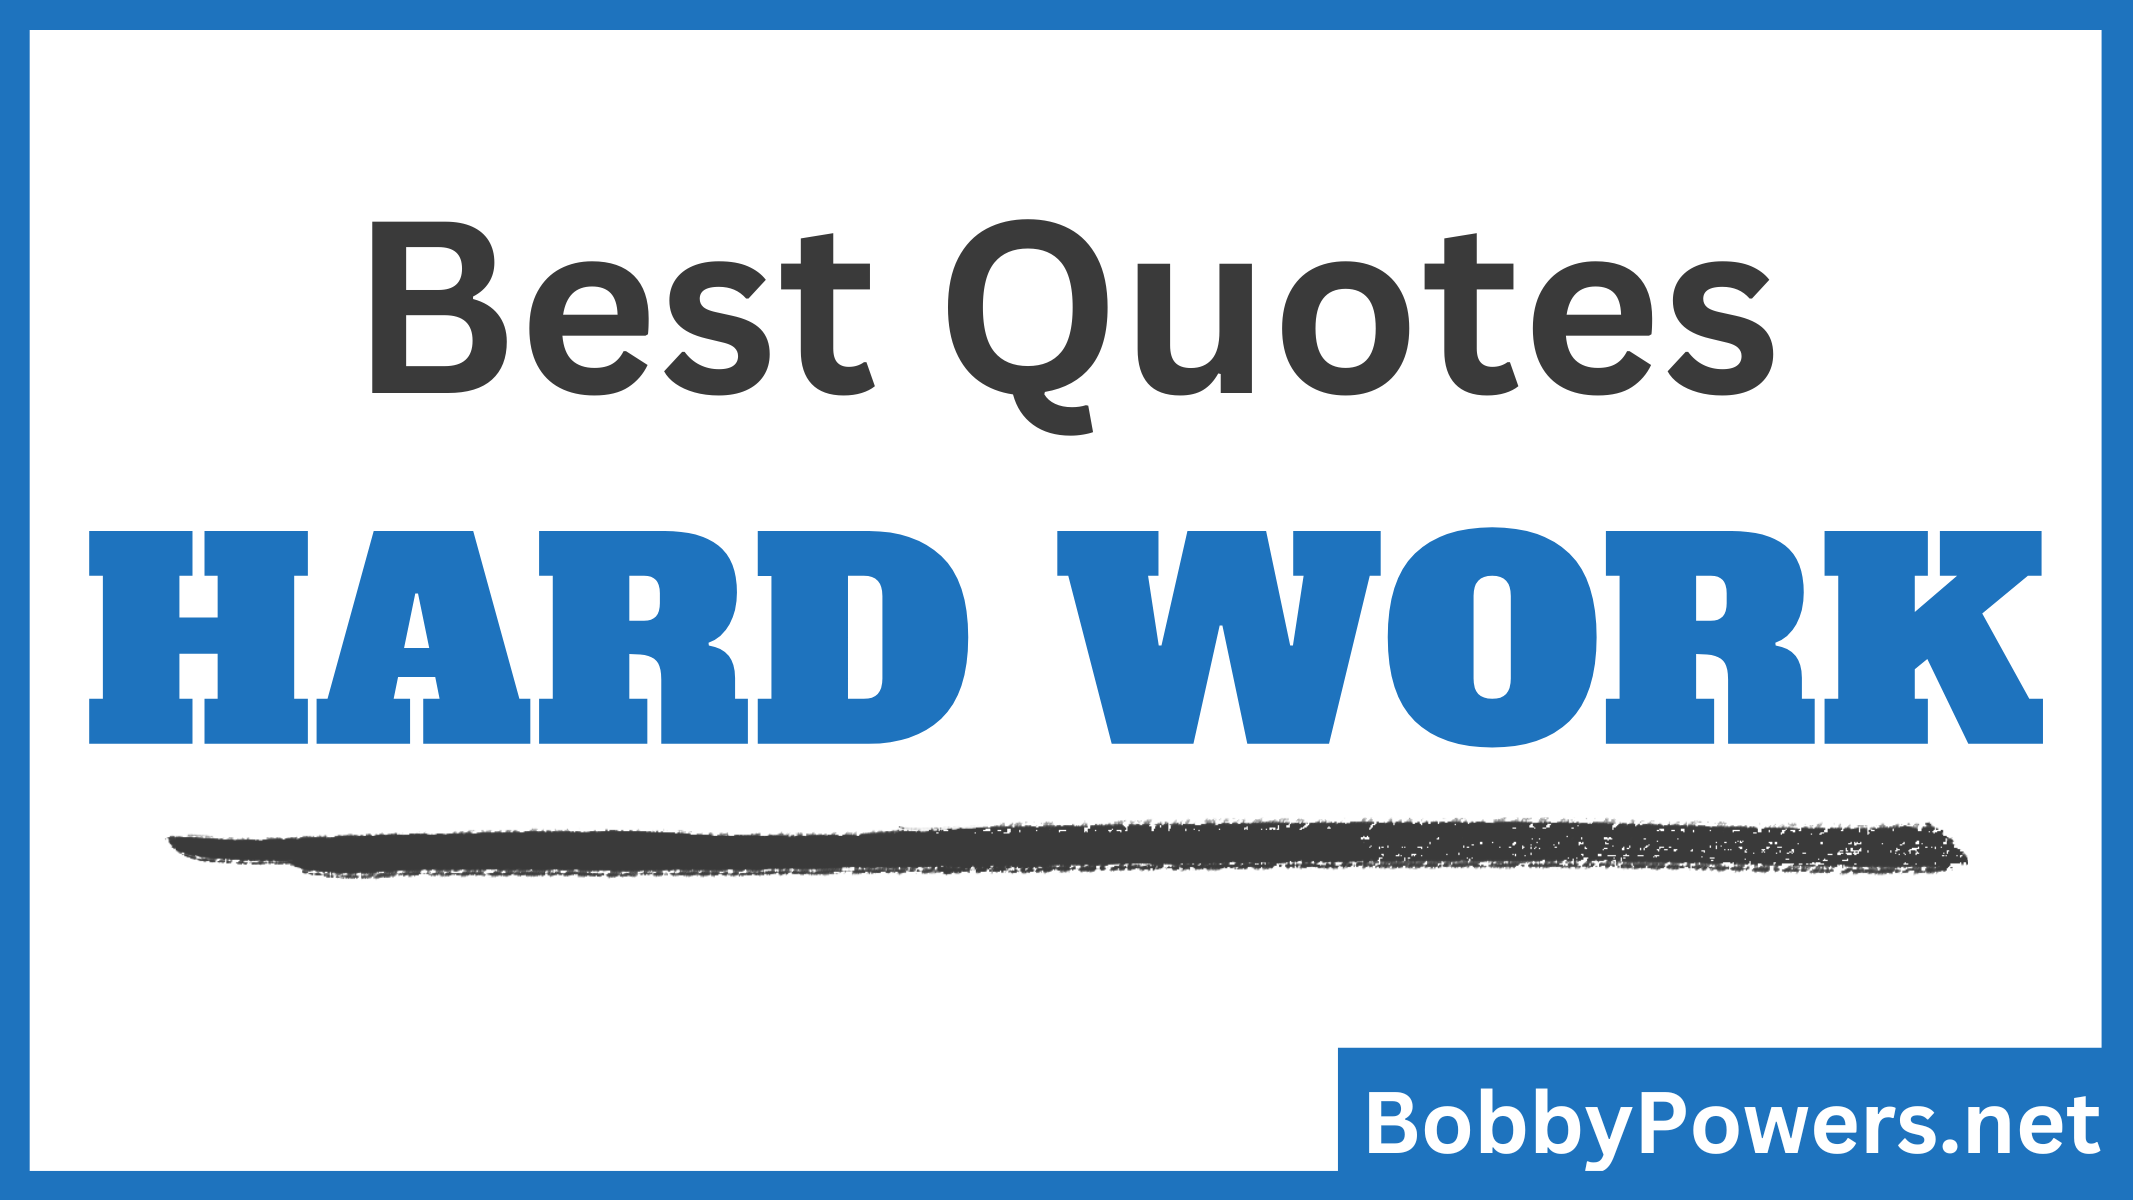 The Best Quotes About Hard Work - BobbyPowers.net